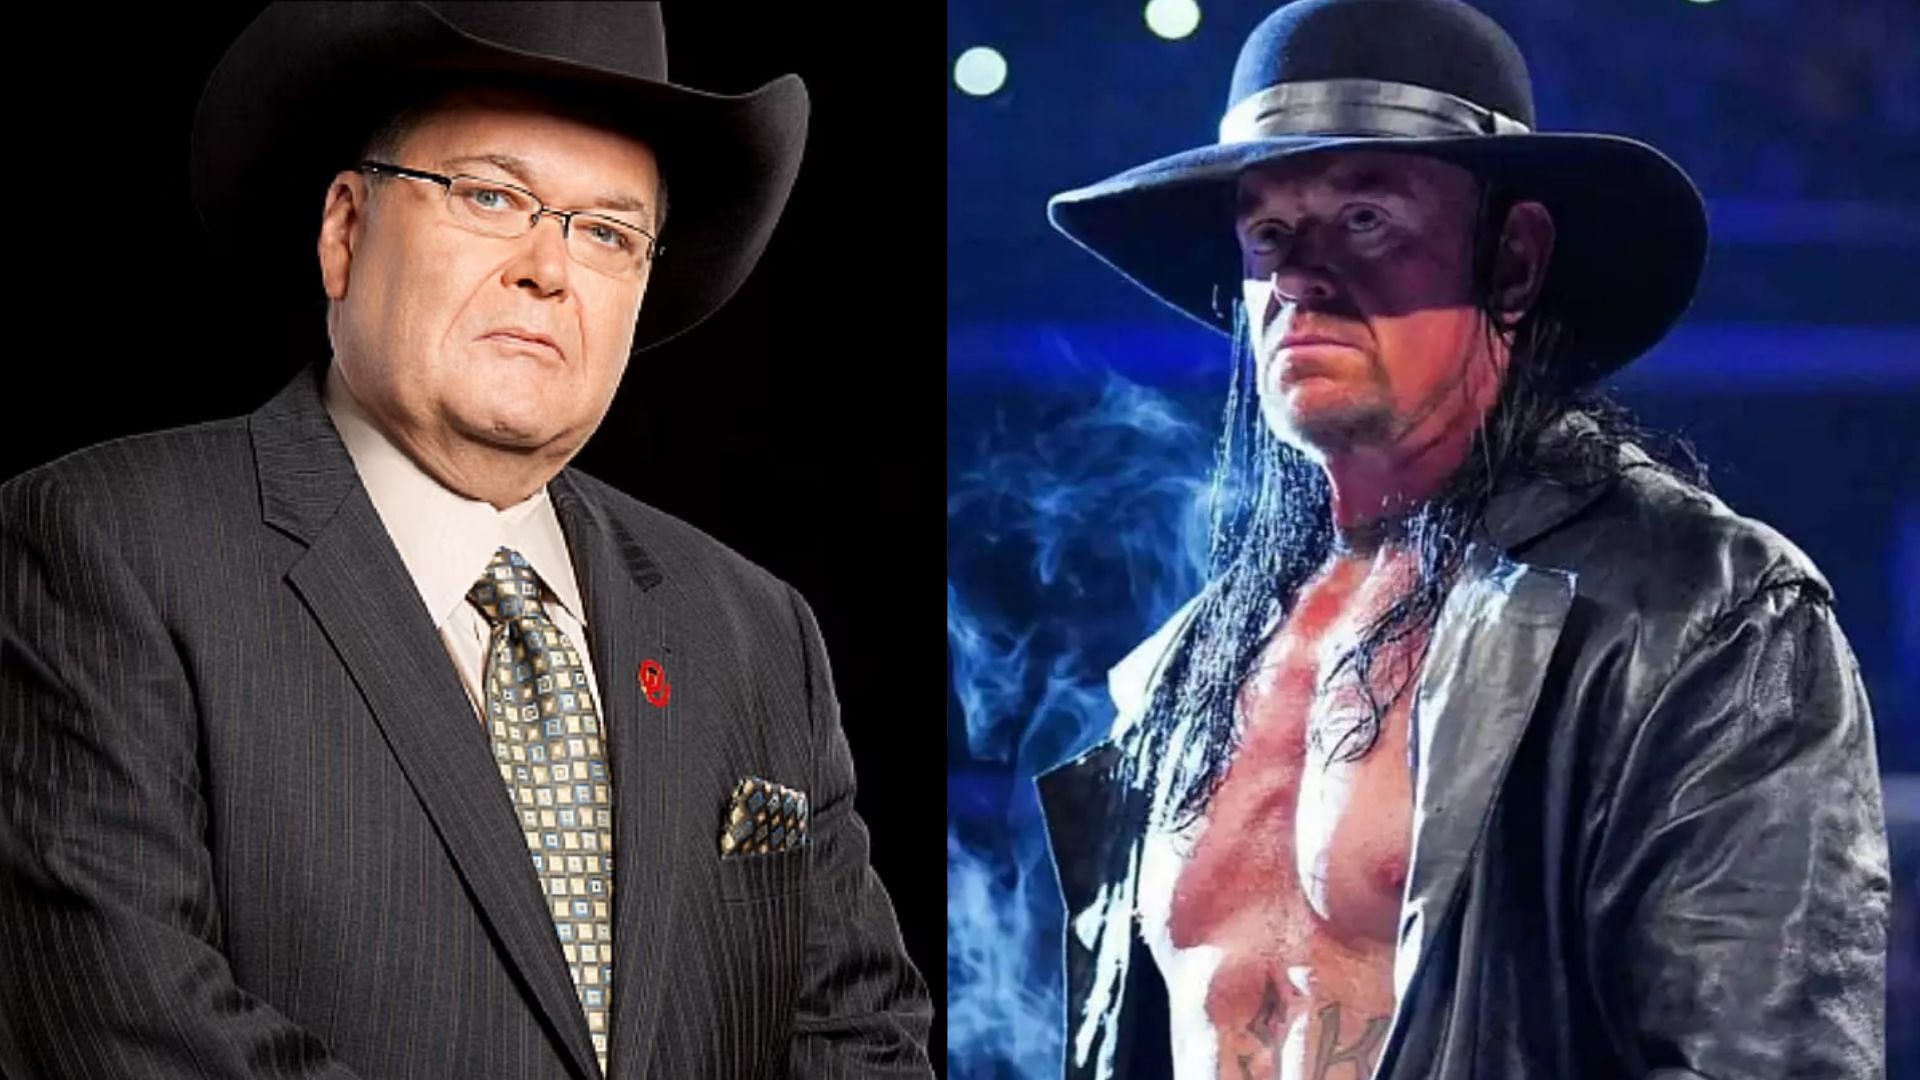 Would a victory over The Undertaker have changed this WWE veteran